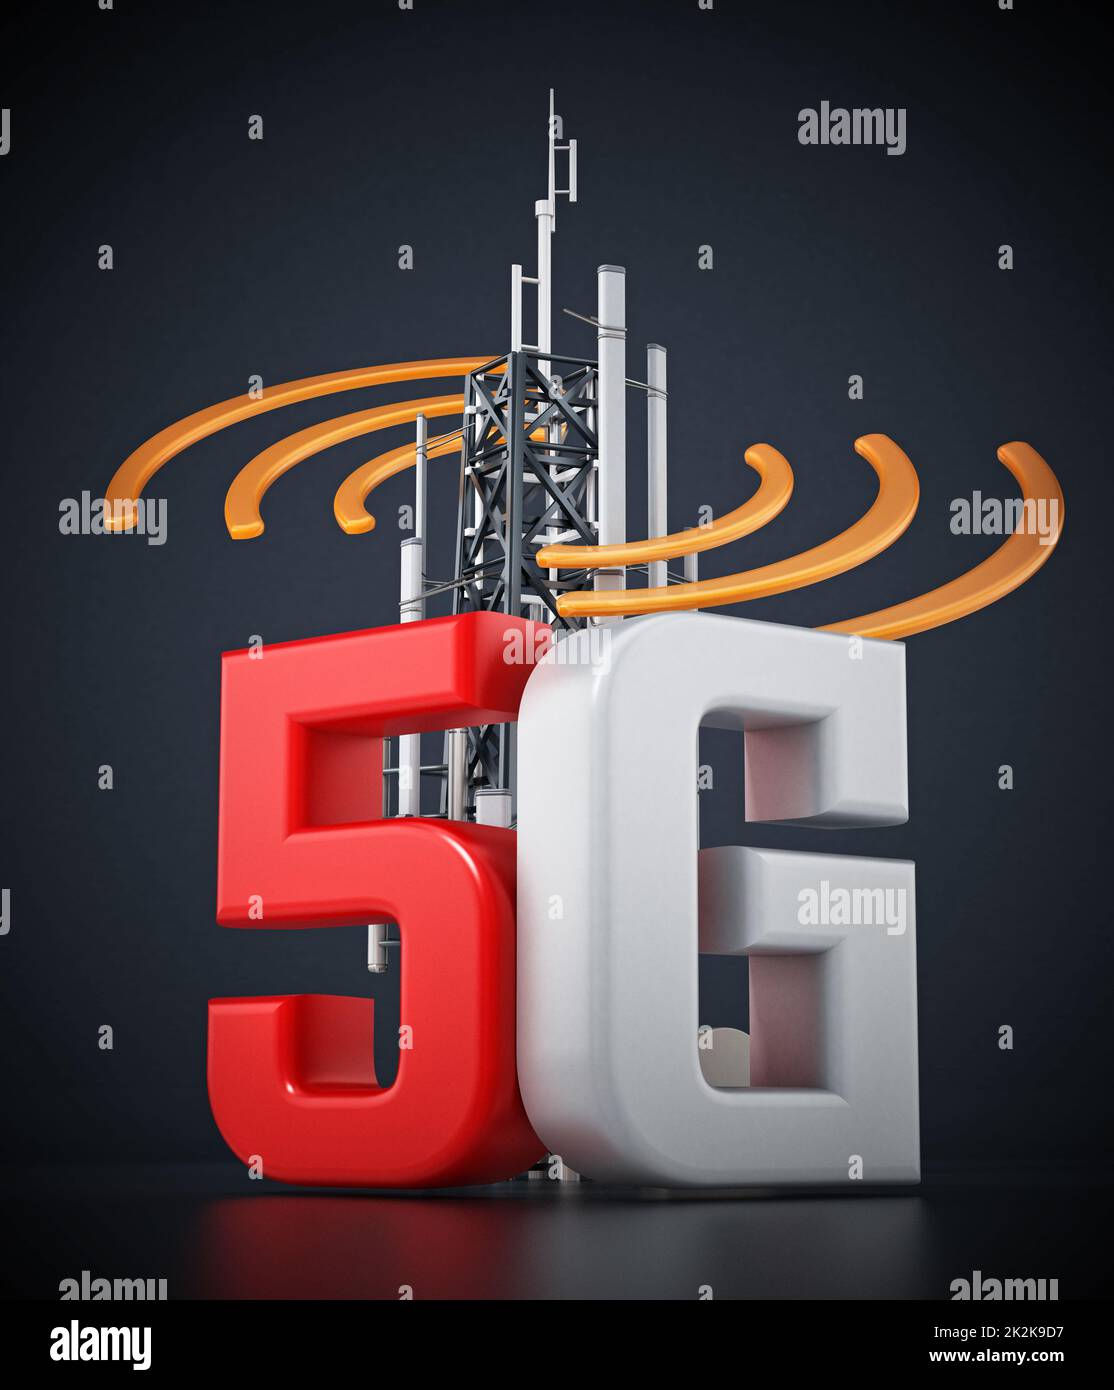 5G text and telecommunications tower with wave symbols. 3D illustration Stock Photo